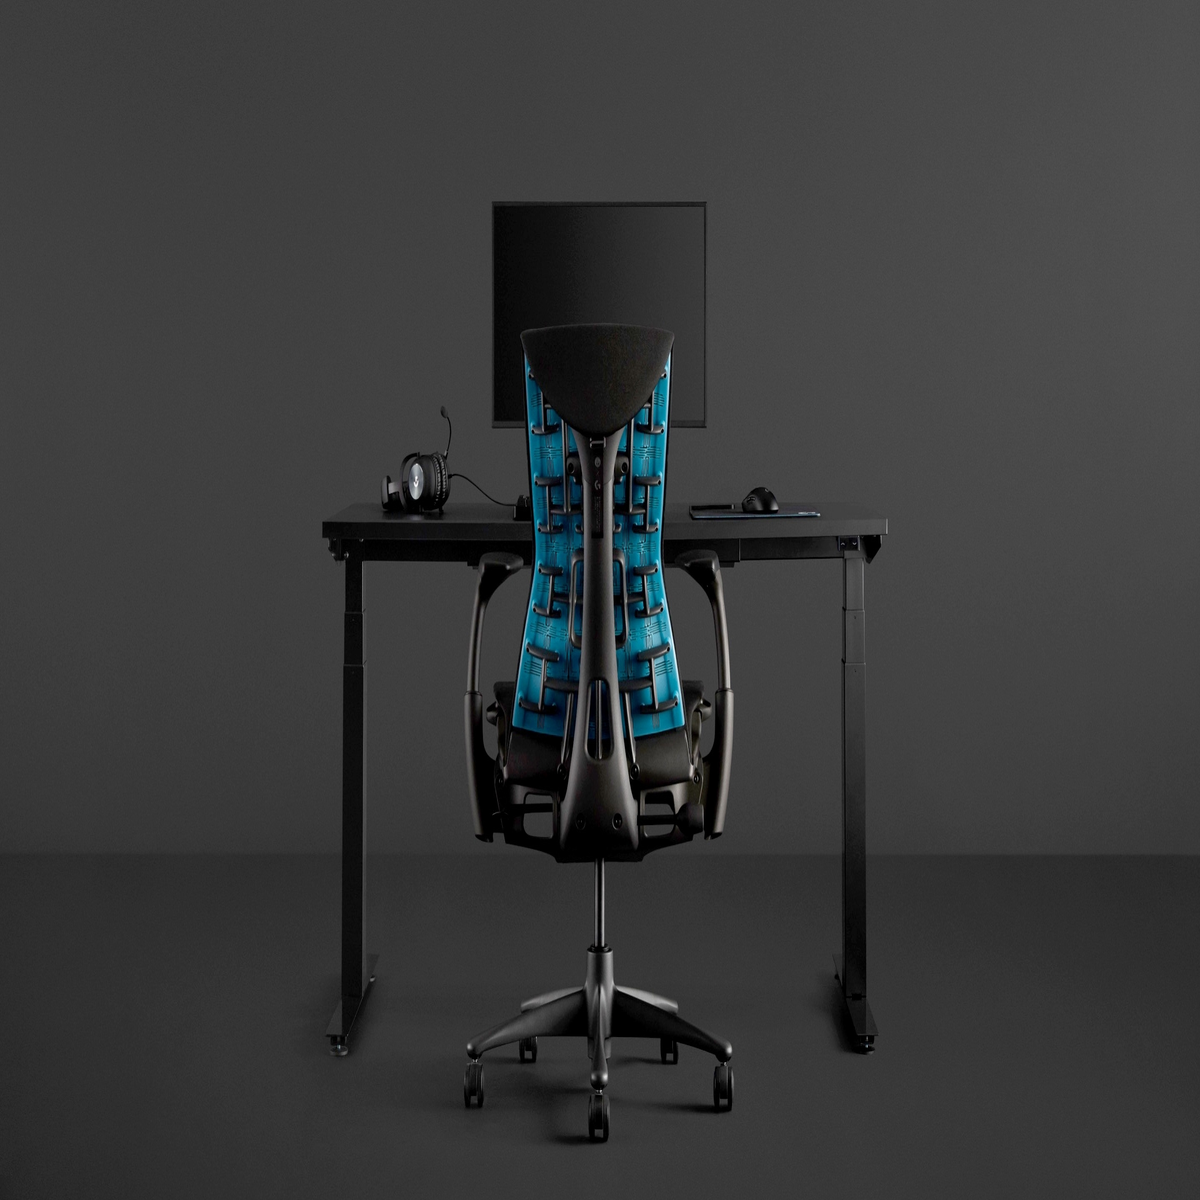 https://assetsio.reedpopcdn.com/digitalfoundry-best-gaming-chairs-1629296243368.jpg?width=1200&height=1200&fit=crop&quality=100&format=png&enable=upscale&auto=webp